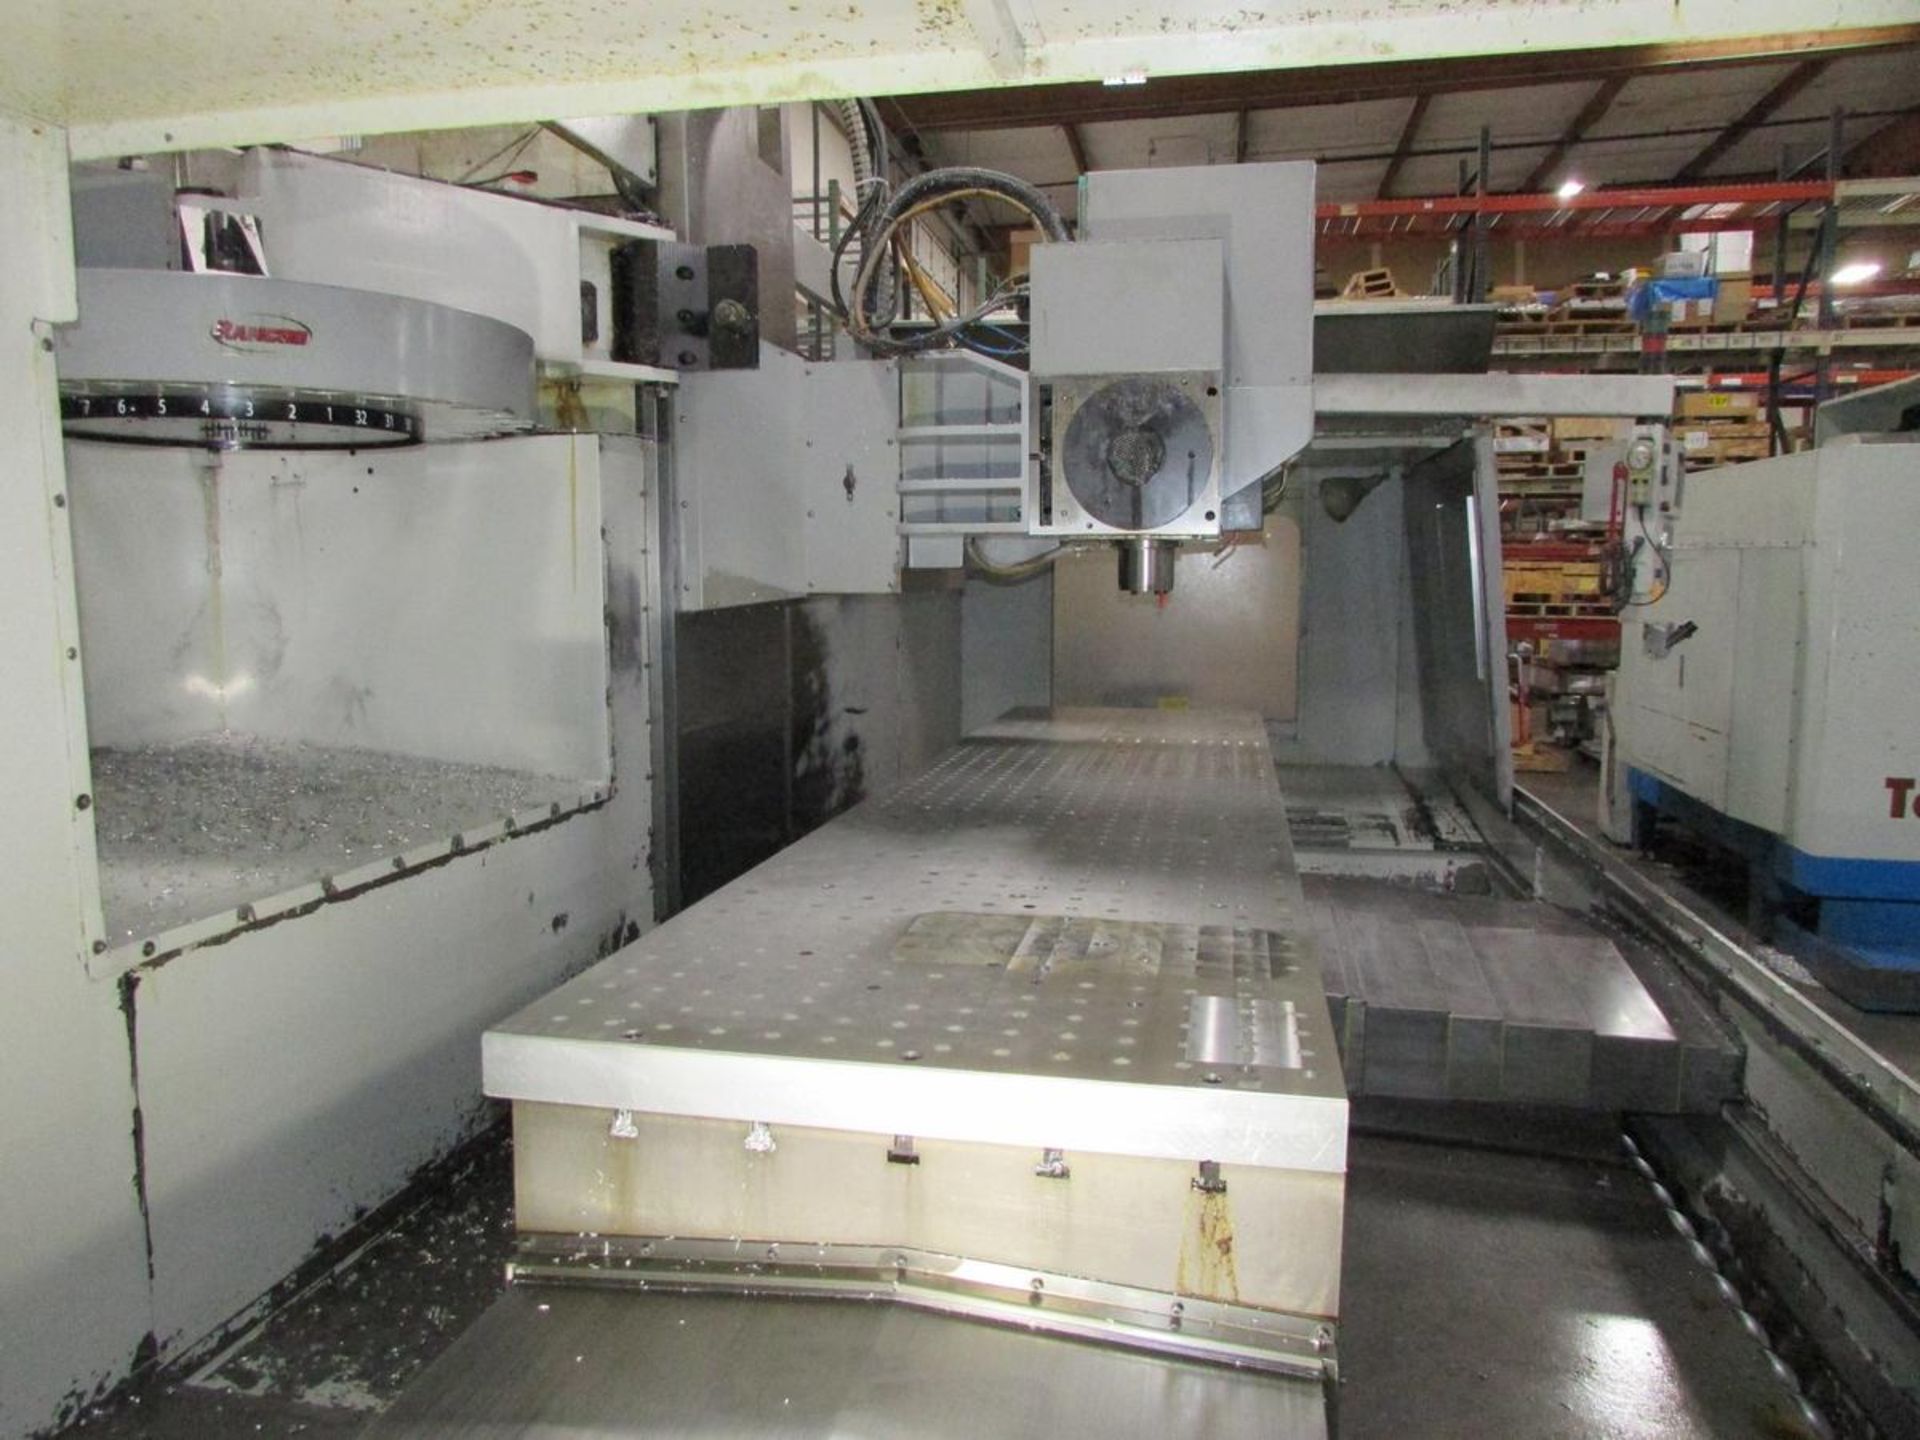 1997 Haas VR-11 5-Axis CNC Vertical Maching Center - Image 26 of 30